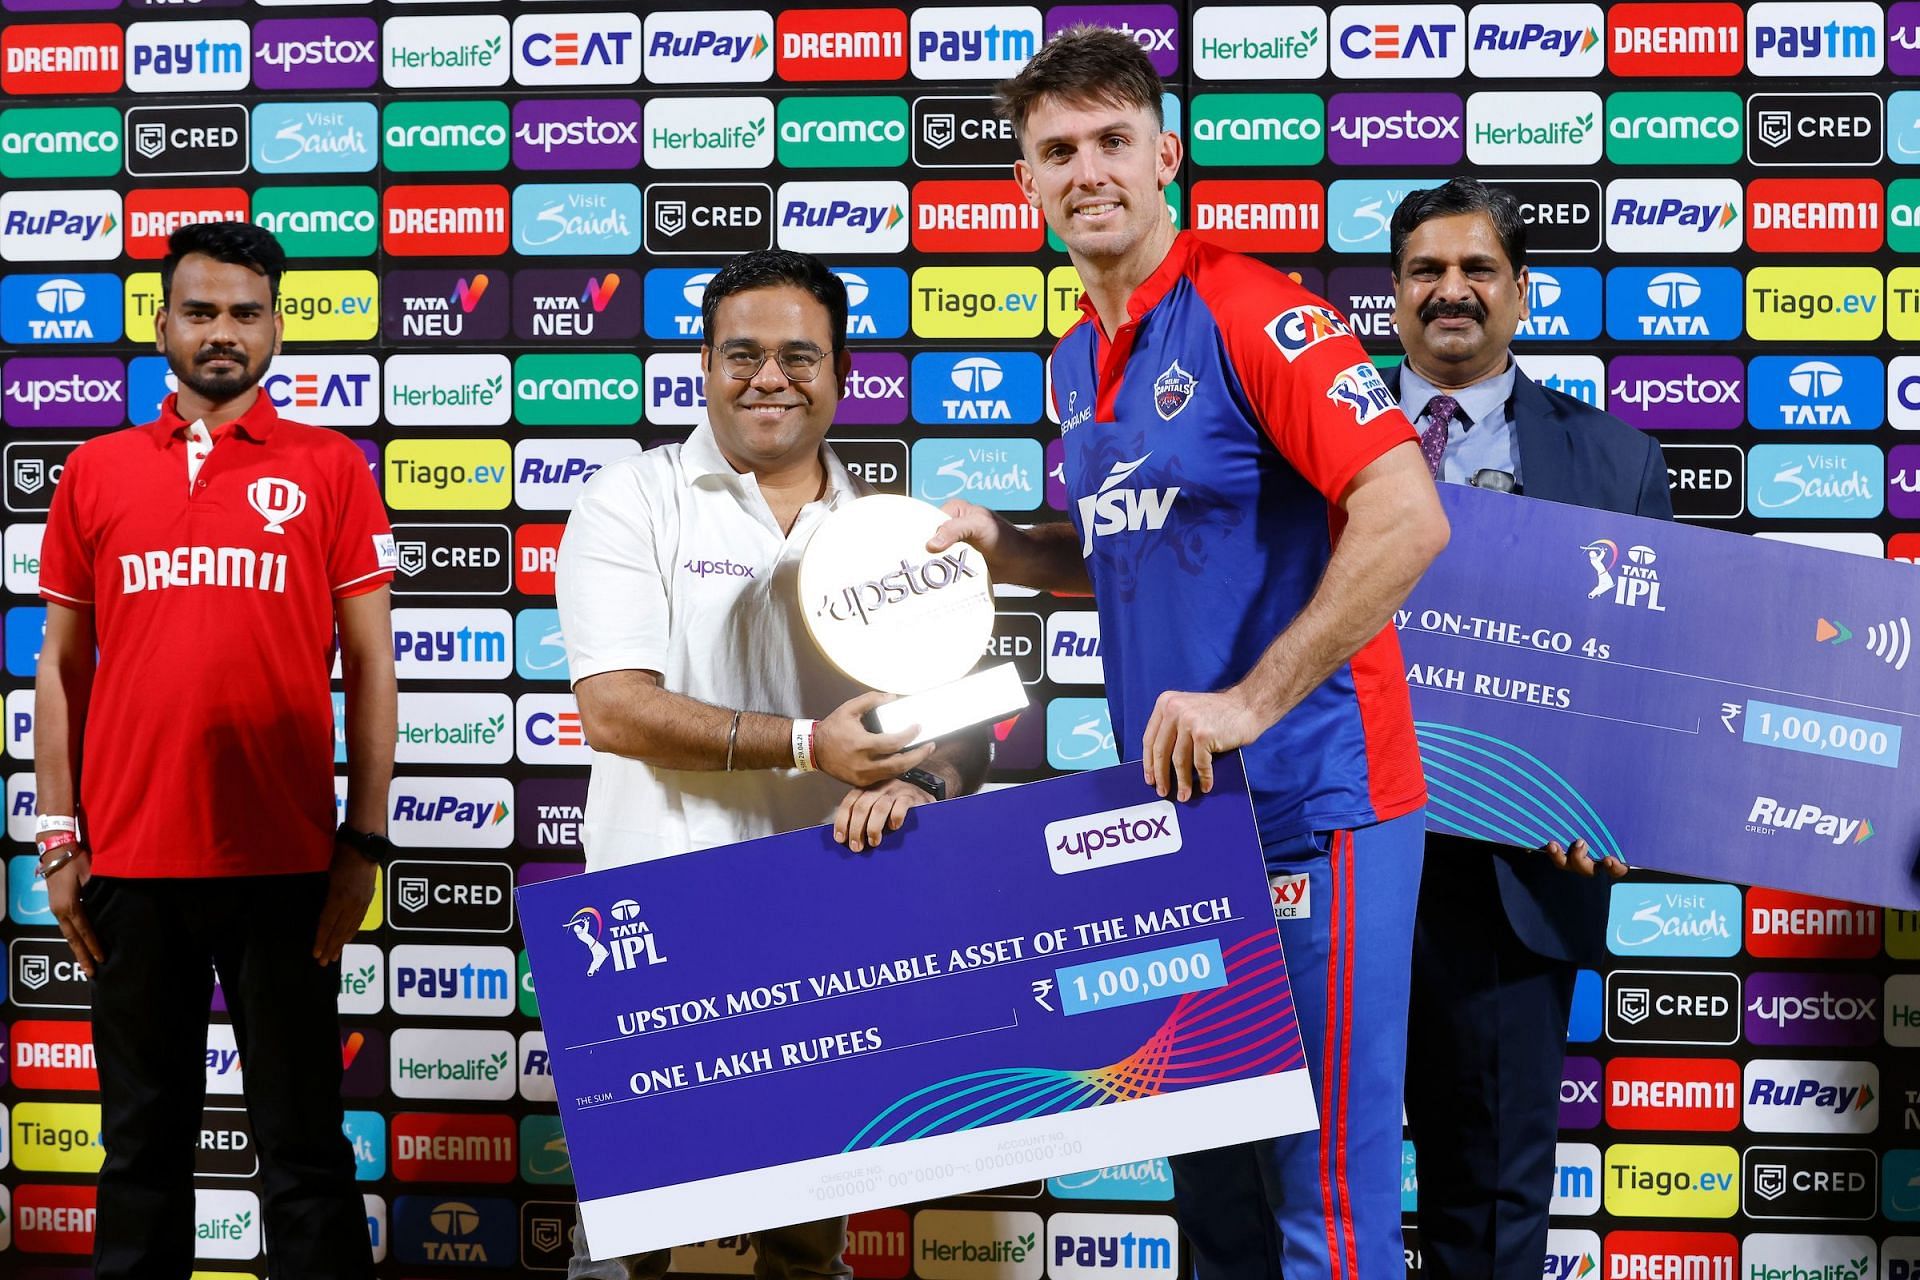 Mitchell Marsh walked away with the Player of the Match award [Image: IPL]